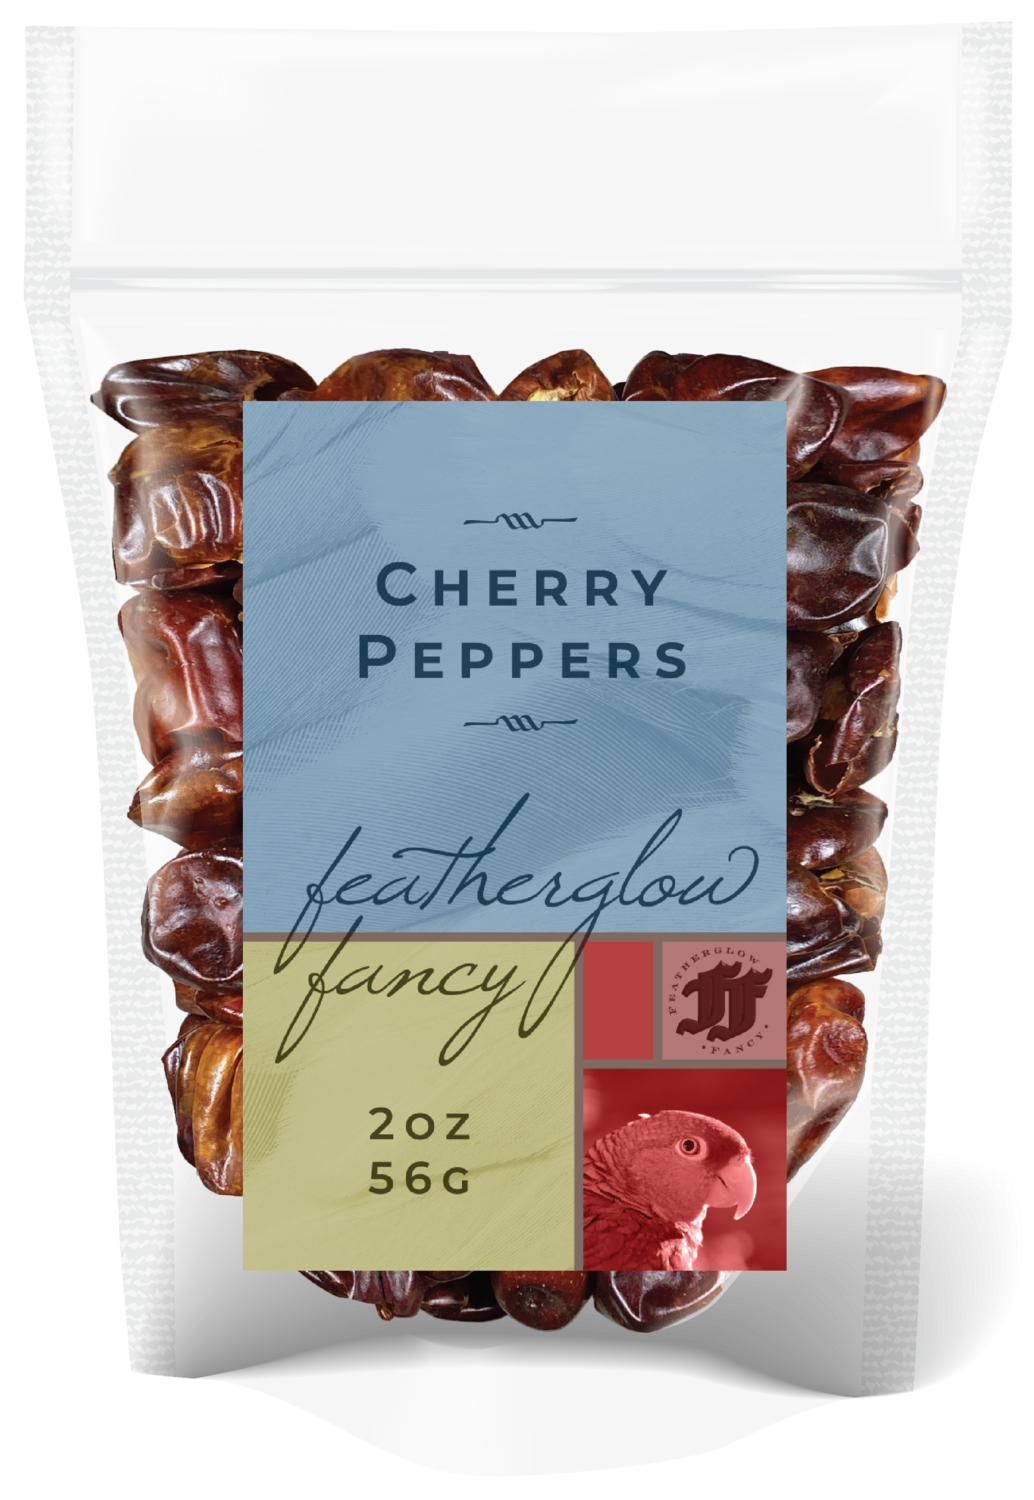 2 oz Dried Cherry Peppers by Featherglow Fancy